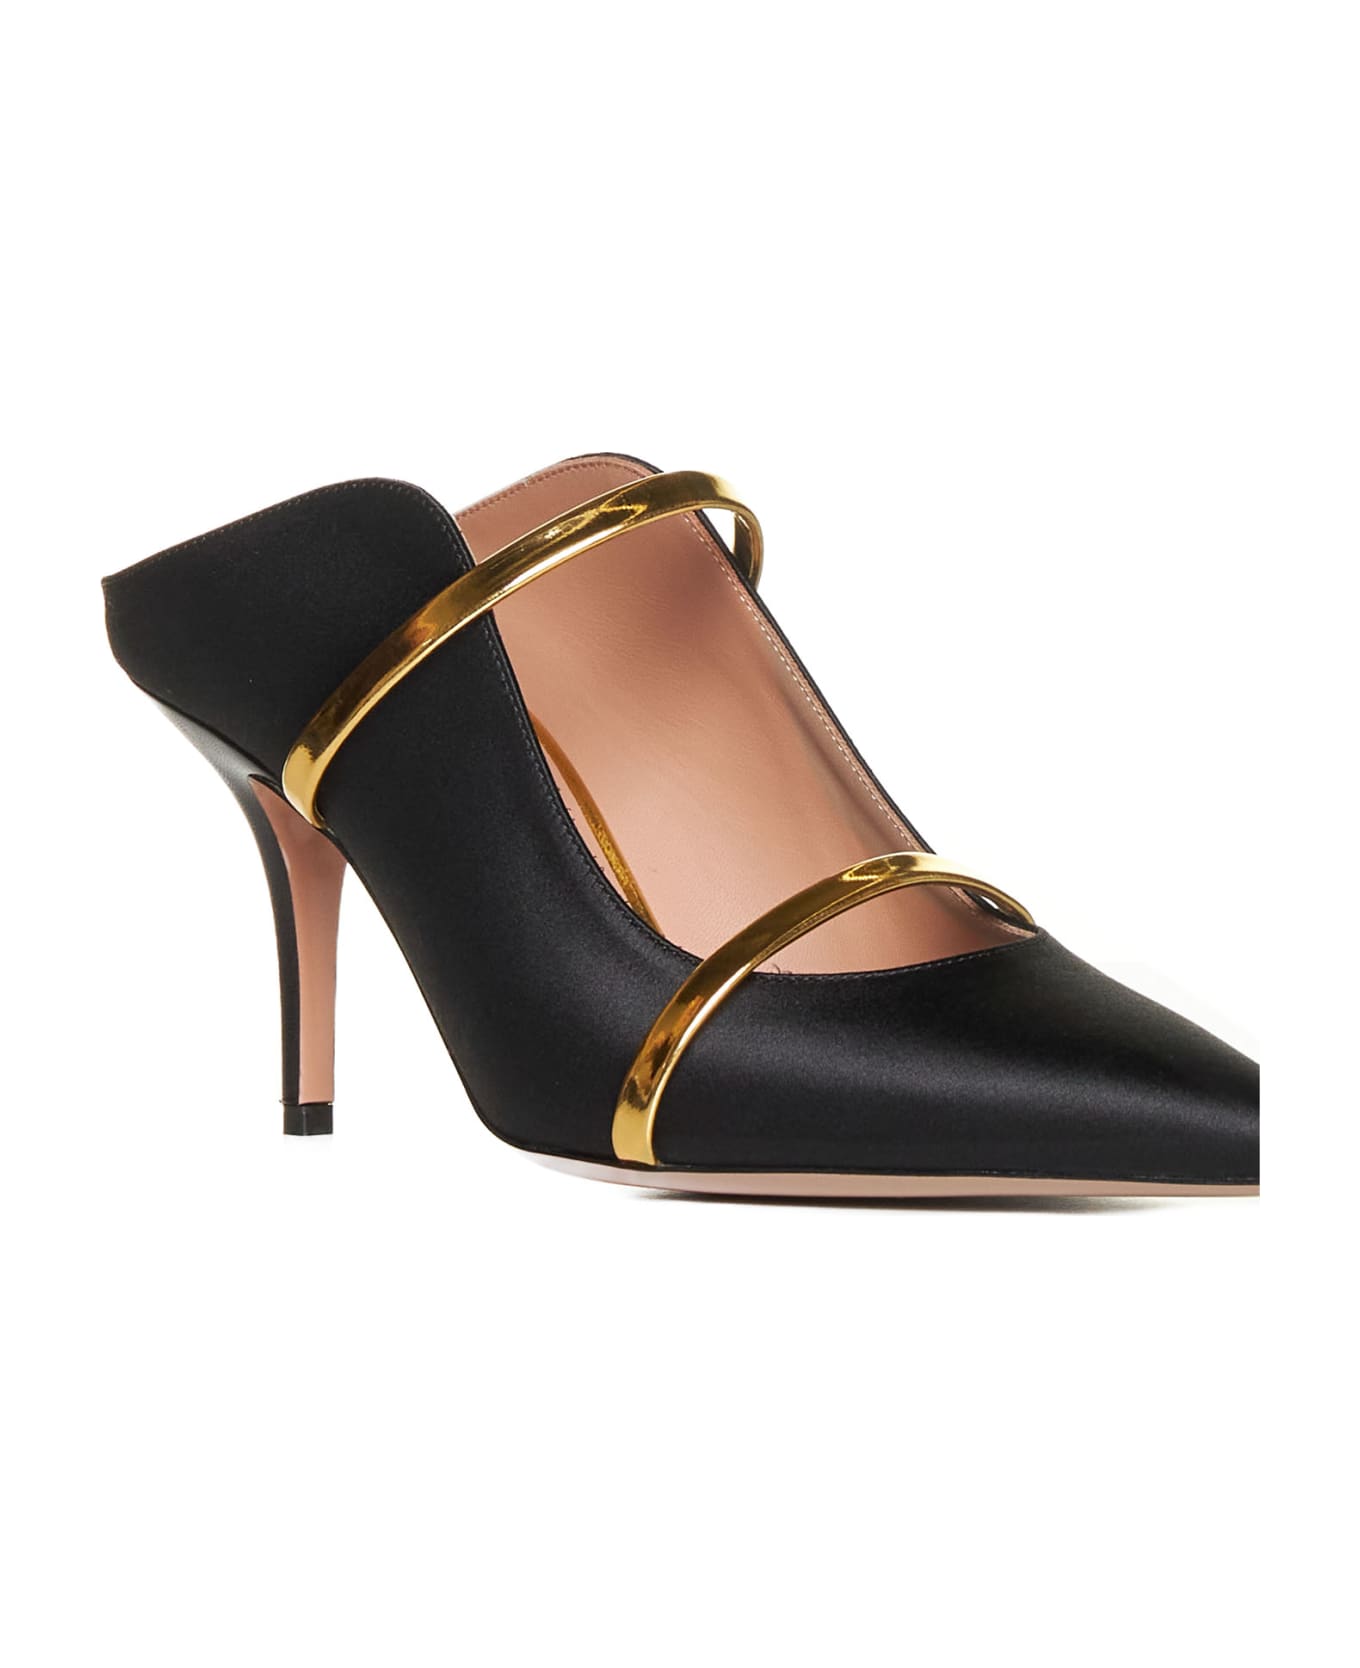 Malone Souliers Sandals - Black gold